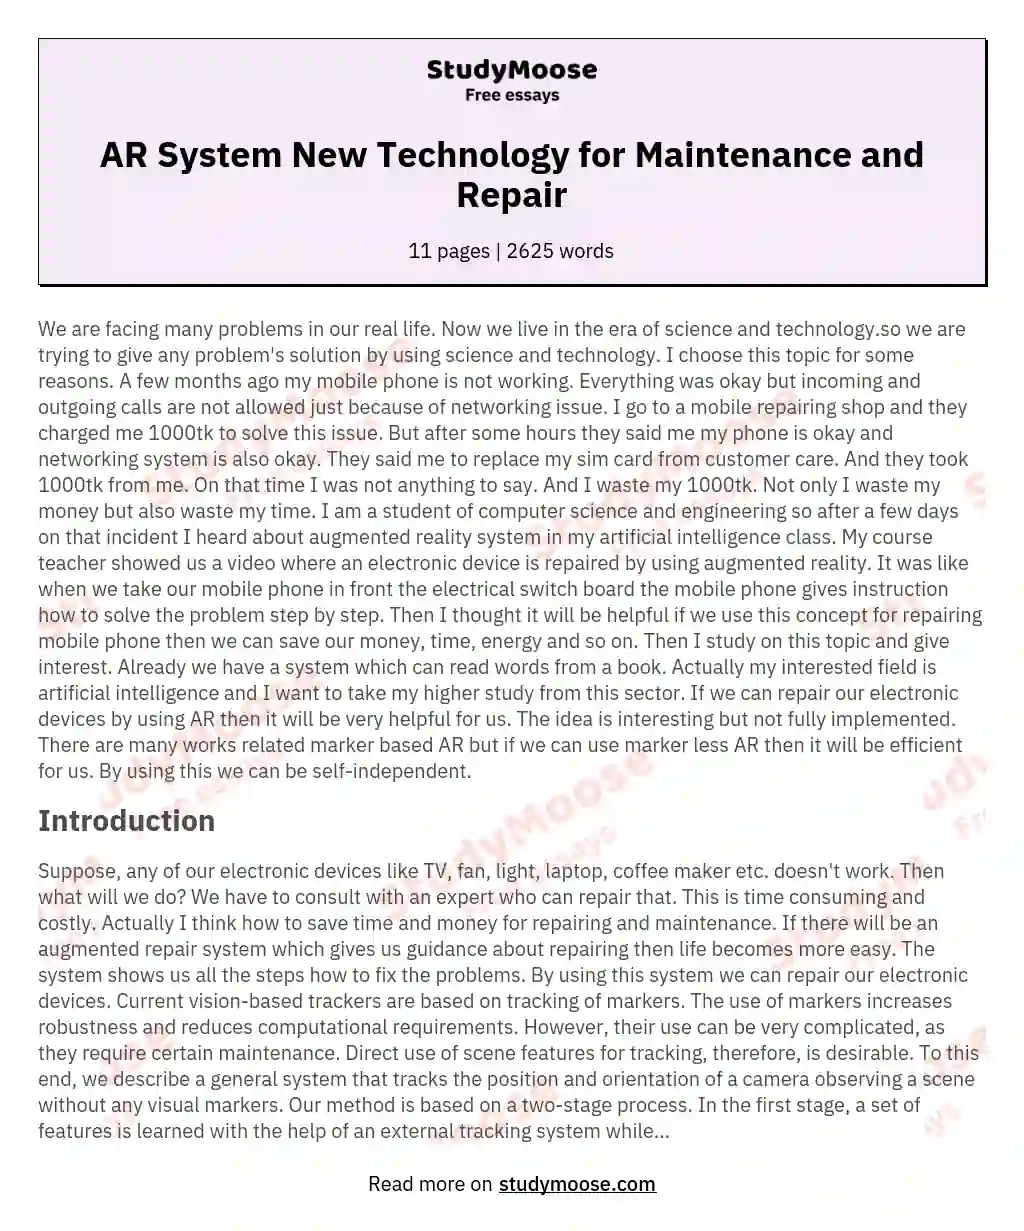 AR System New Technology for Maintenance and Repair essay